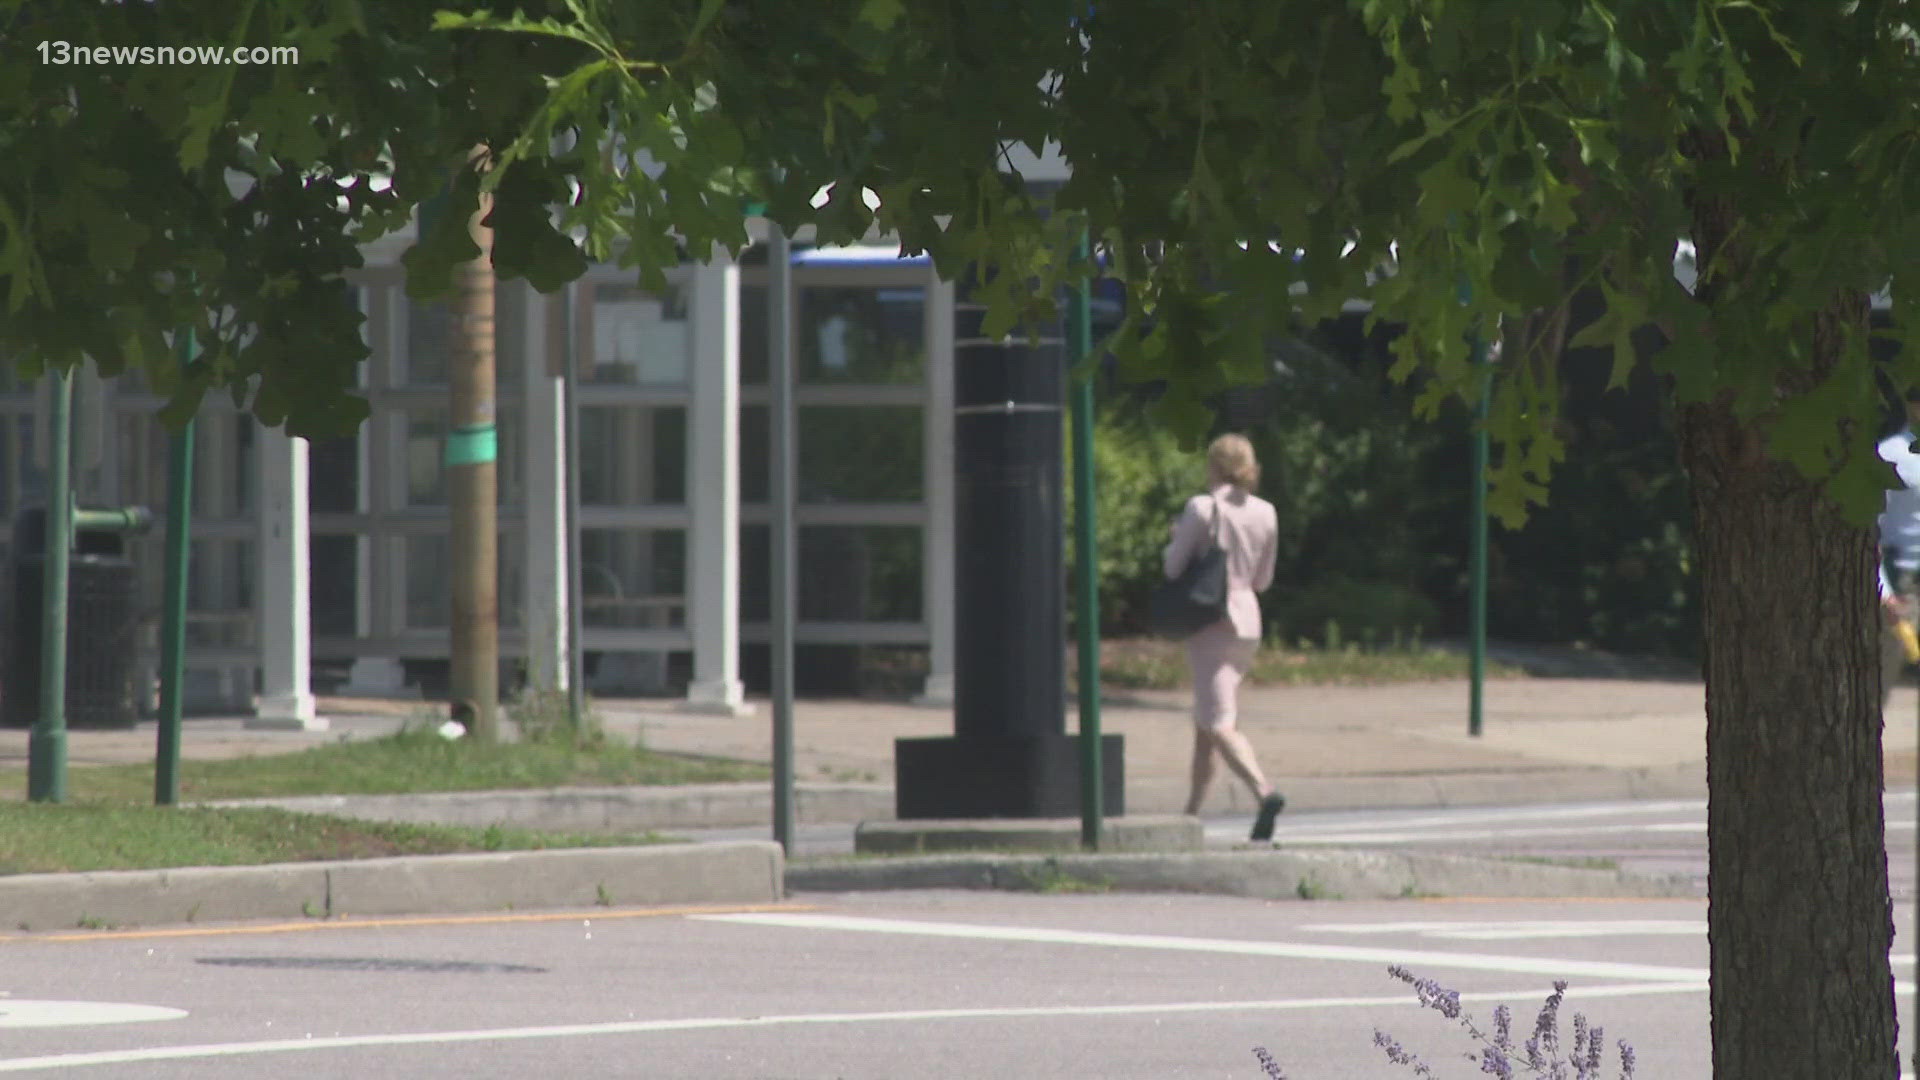 Pedestrian safety is top of mind for Norfolk's Department of Transportation, which is launching a new safety action plan.